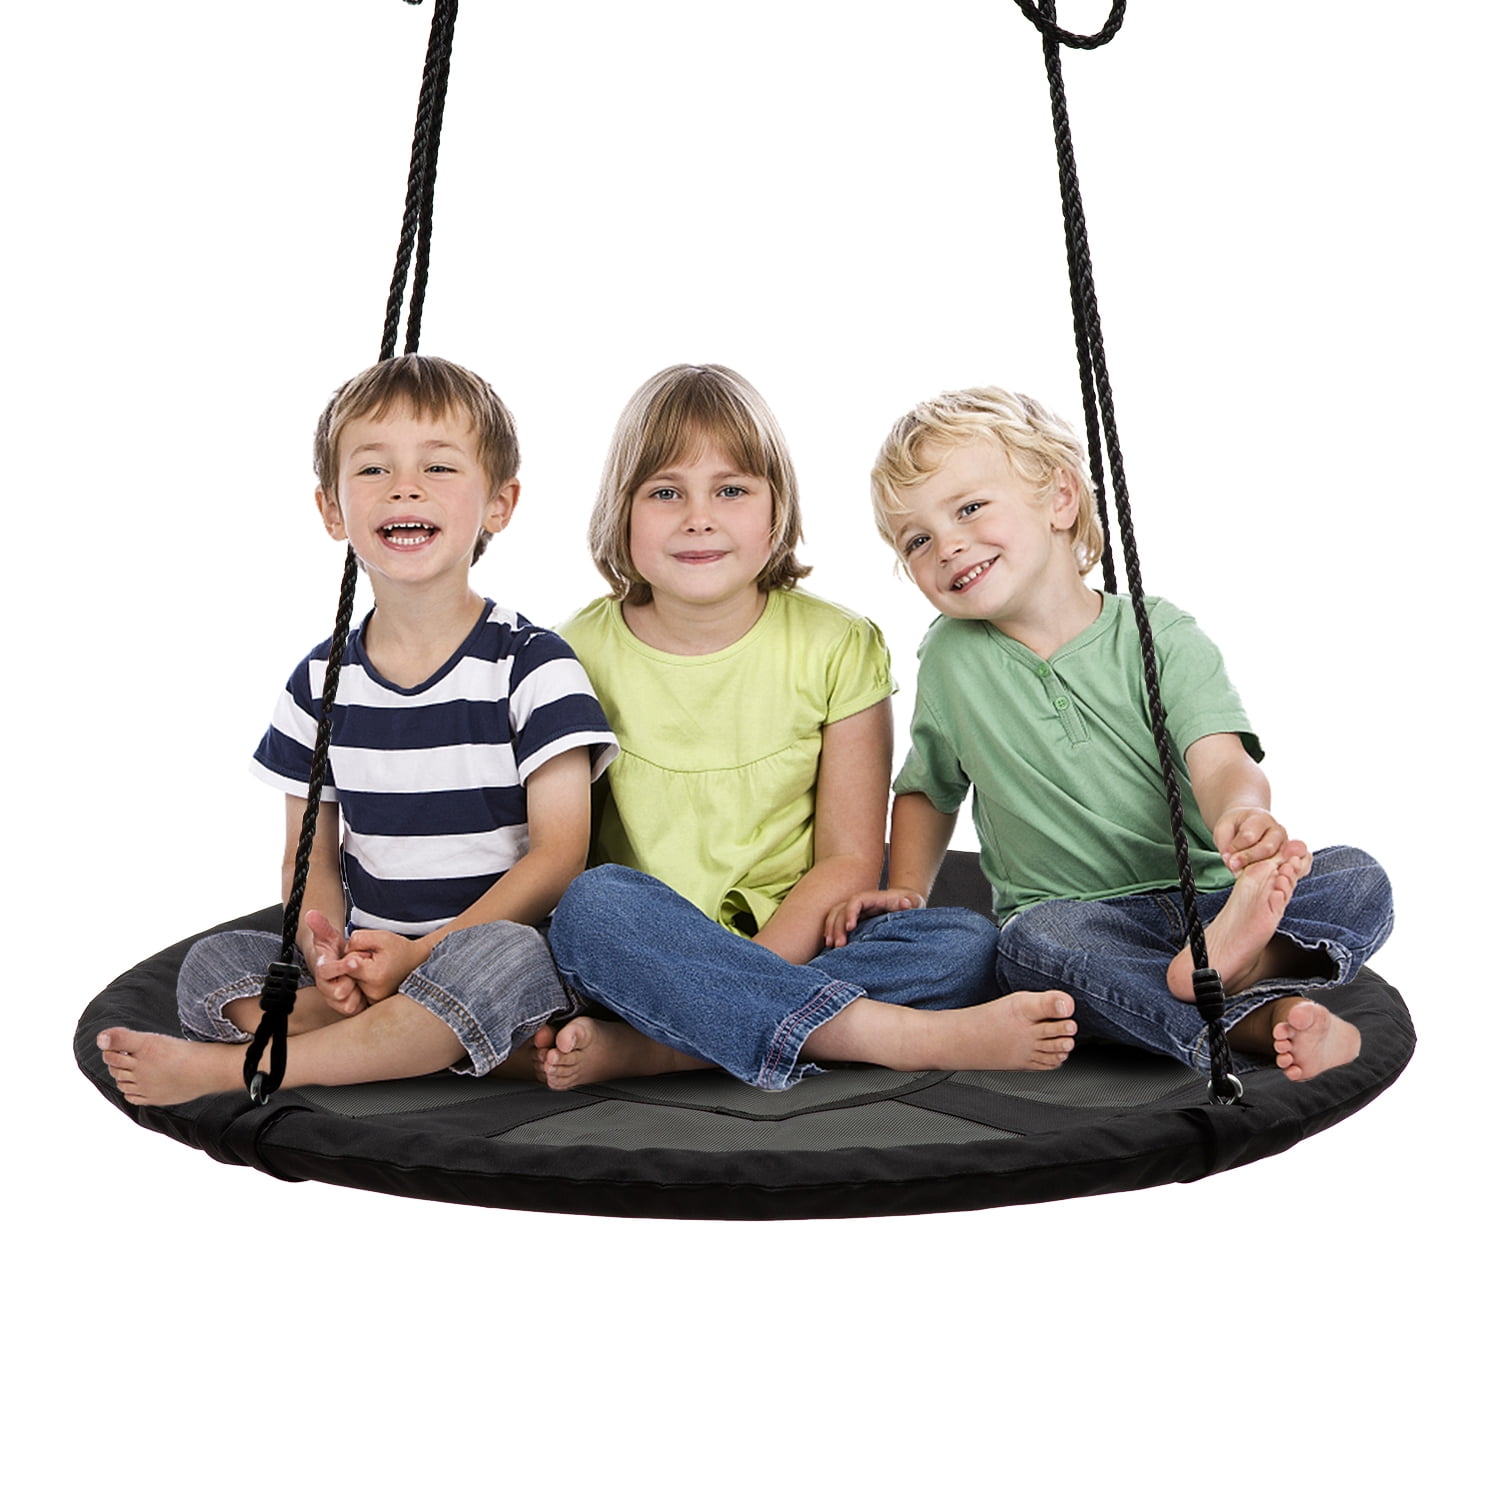 Details about   40'' Outdoor Tree Swing Chair Kids Round Hanging Rope Saucer Seat Yard Toys Blue 